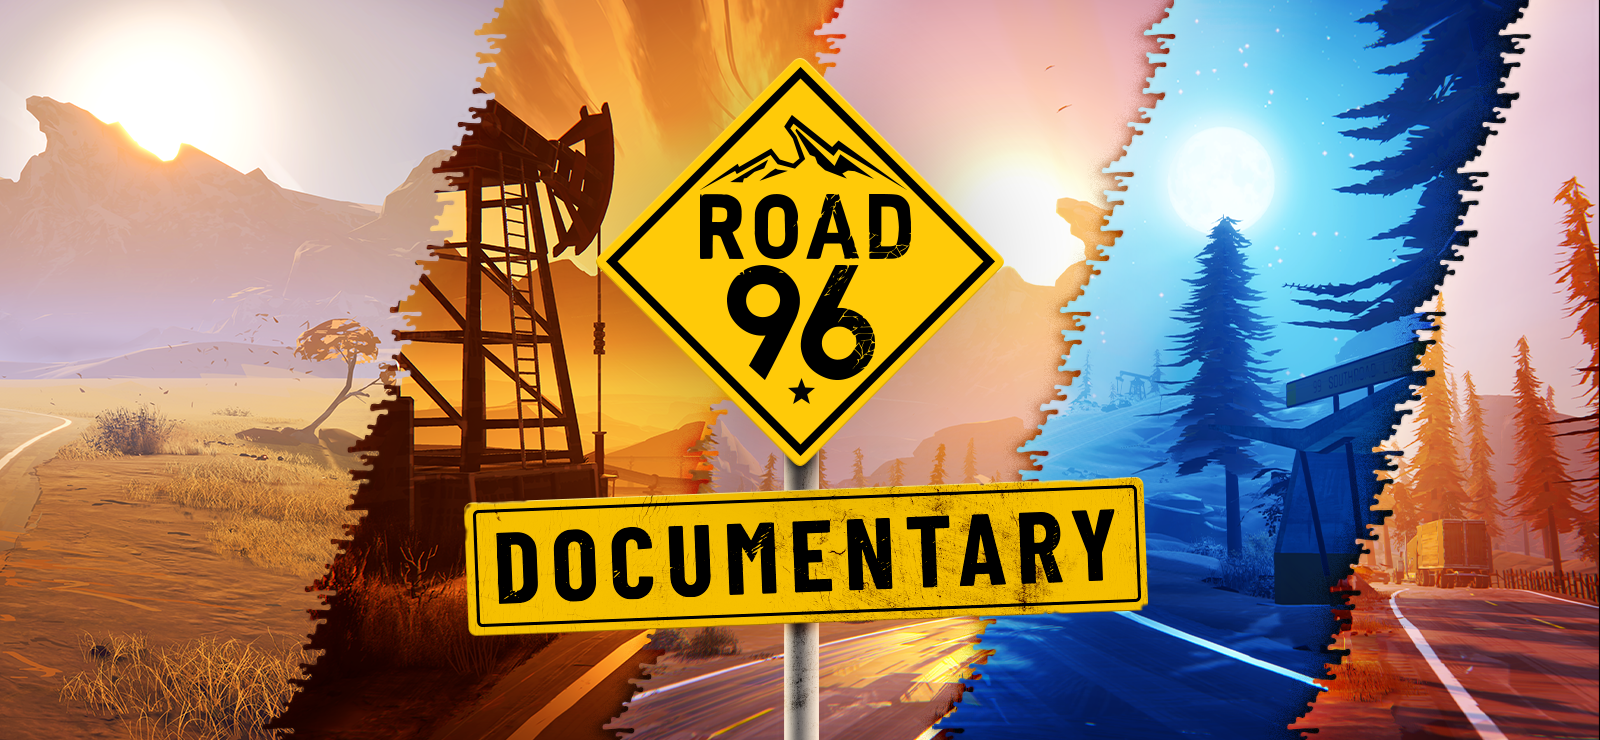 On The Road 96 - Documentary